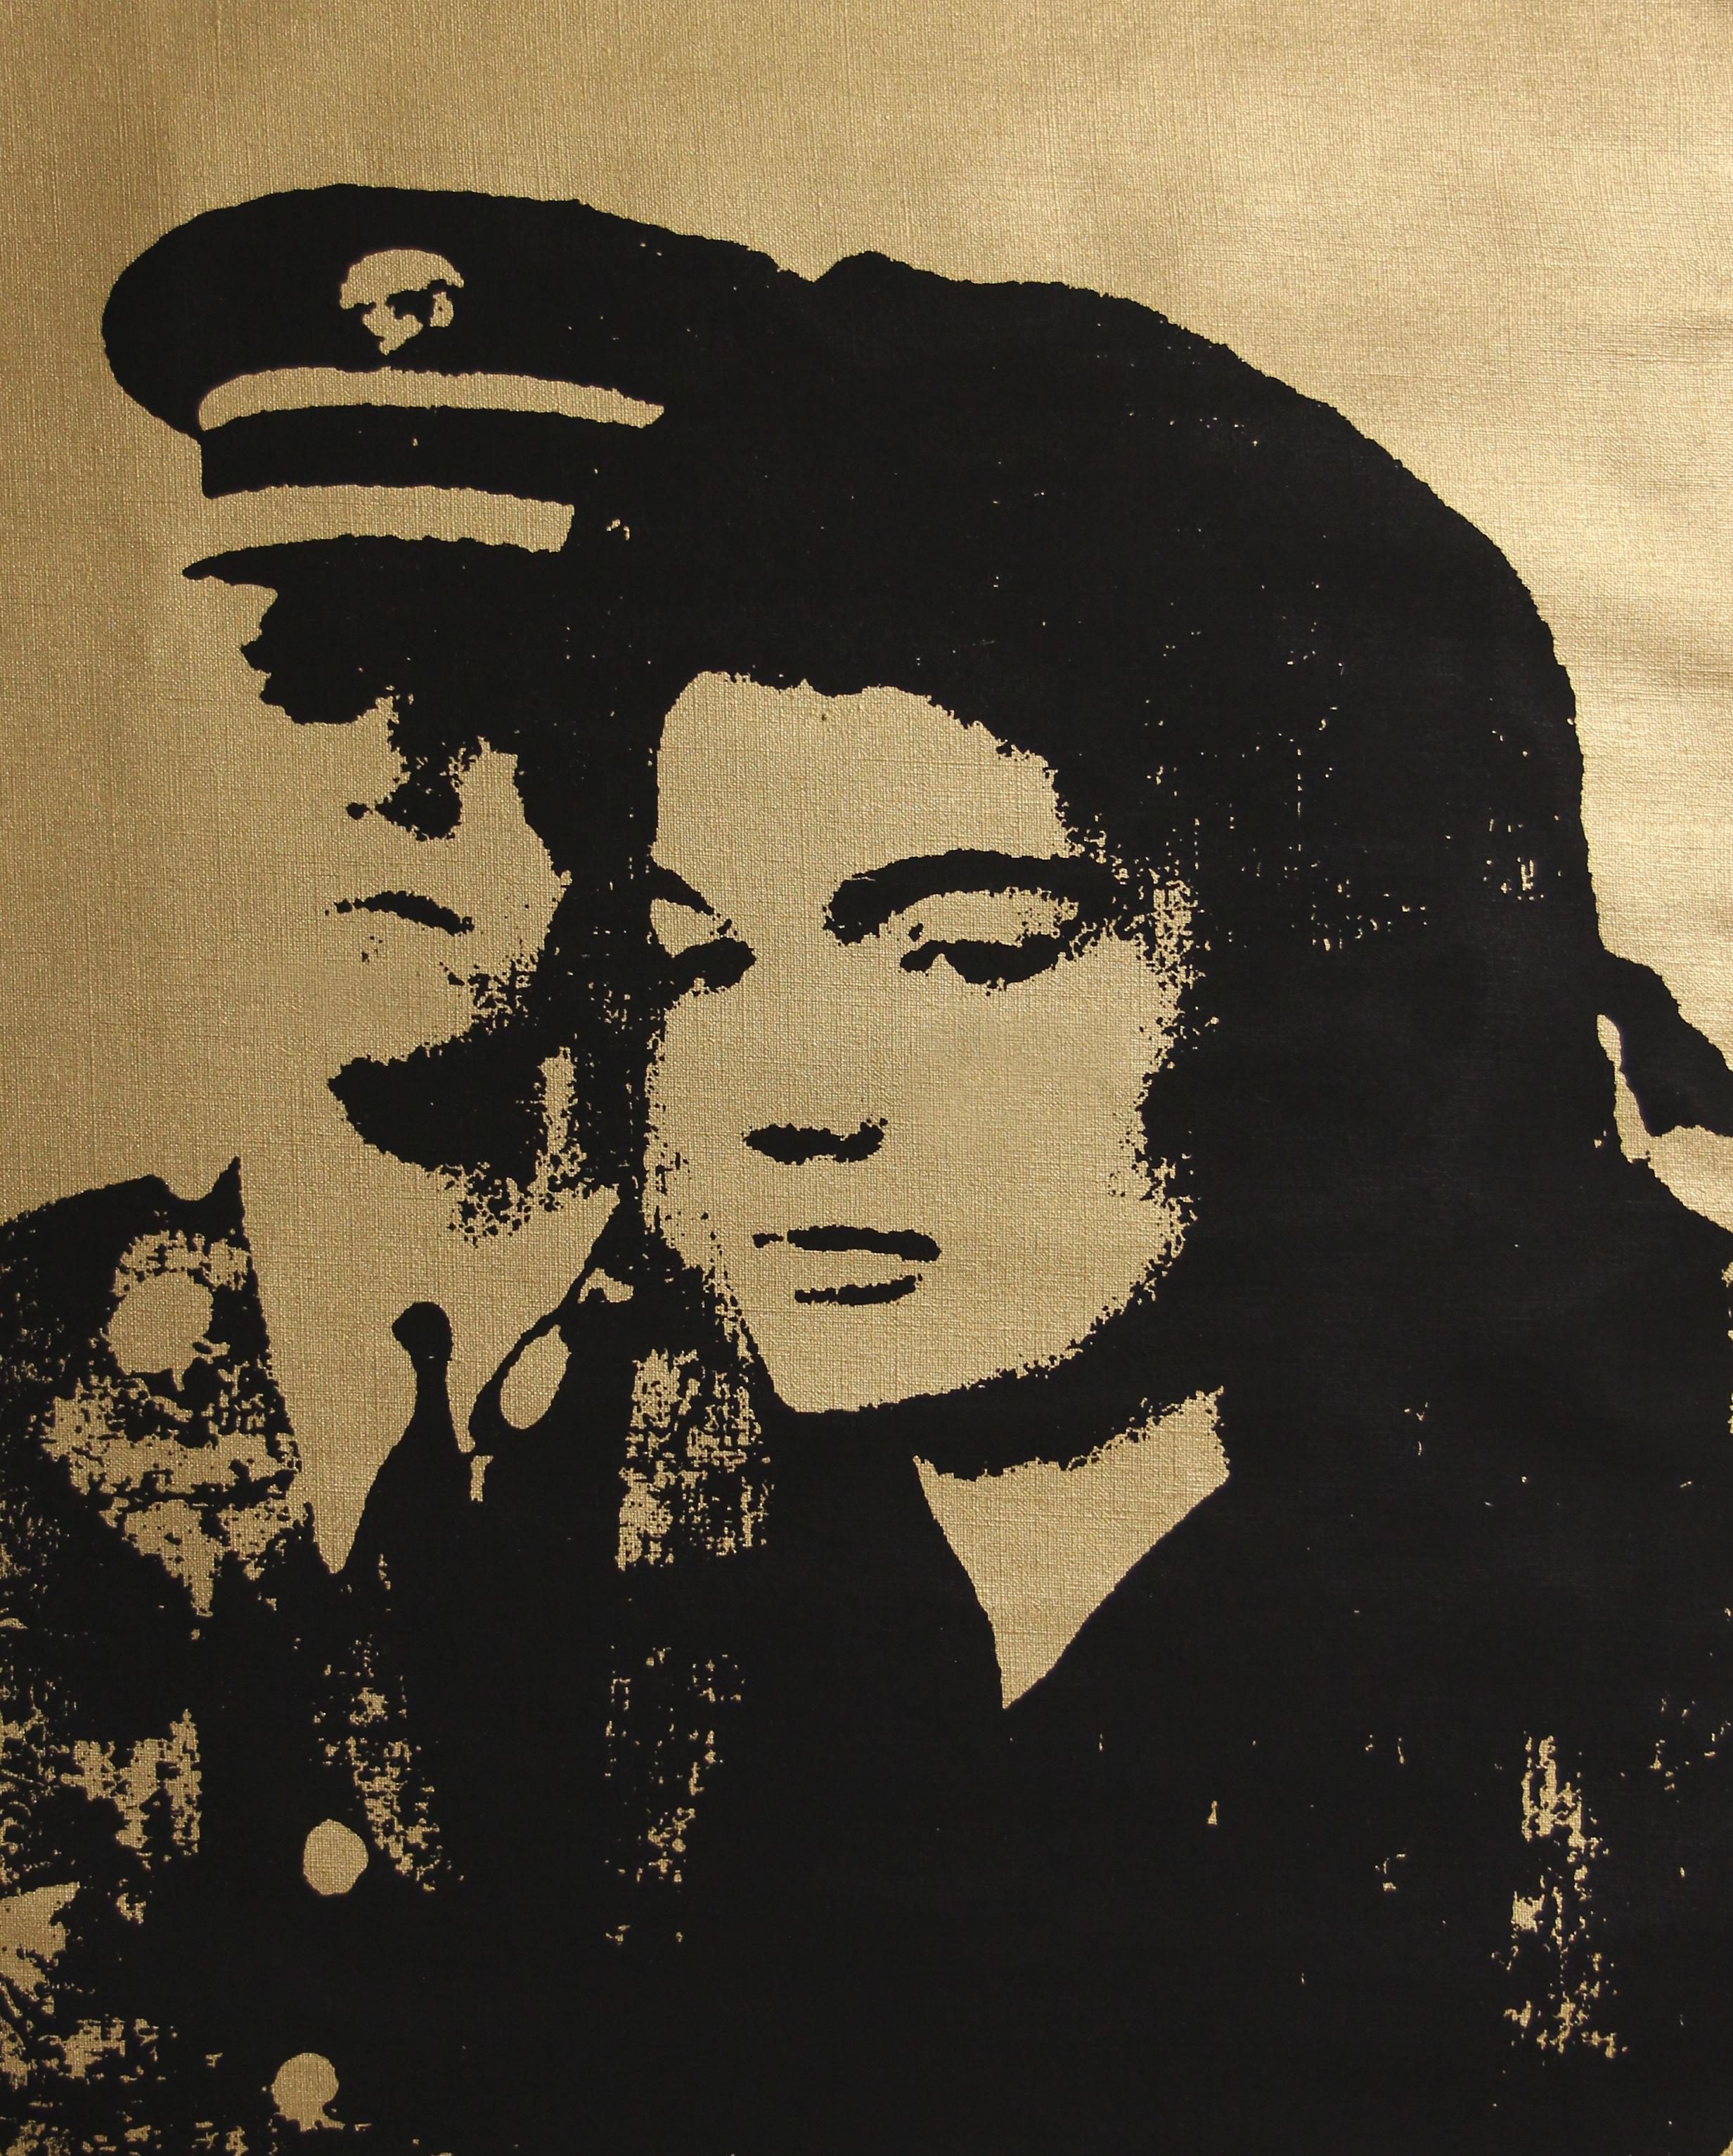 Denied Warhol Jackie in Black and Gold by Charles Lutz
Silkscreen and gold spray enamel on vintage 1960's linen with Denied stamp of the Andy Warhol Art Authentication Board.
20 x 16" inches
2008

Lutz's 2007 ''Warhol Denied'' series gained